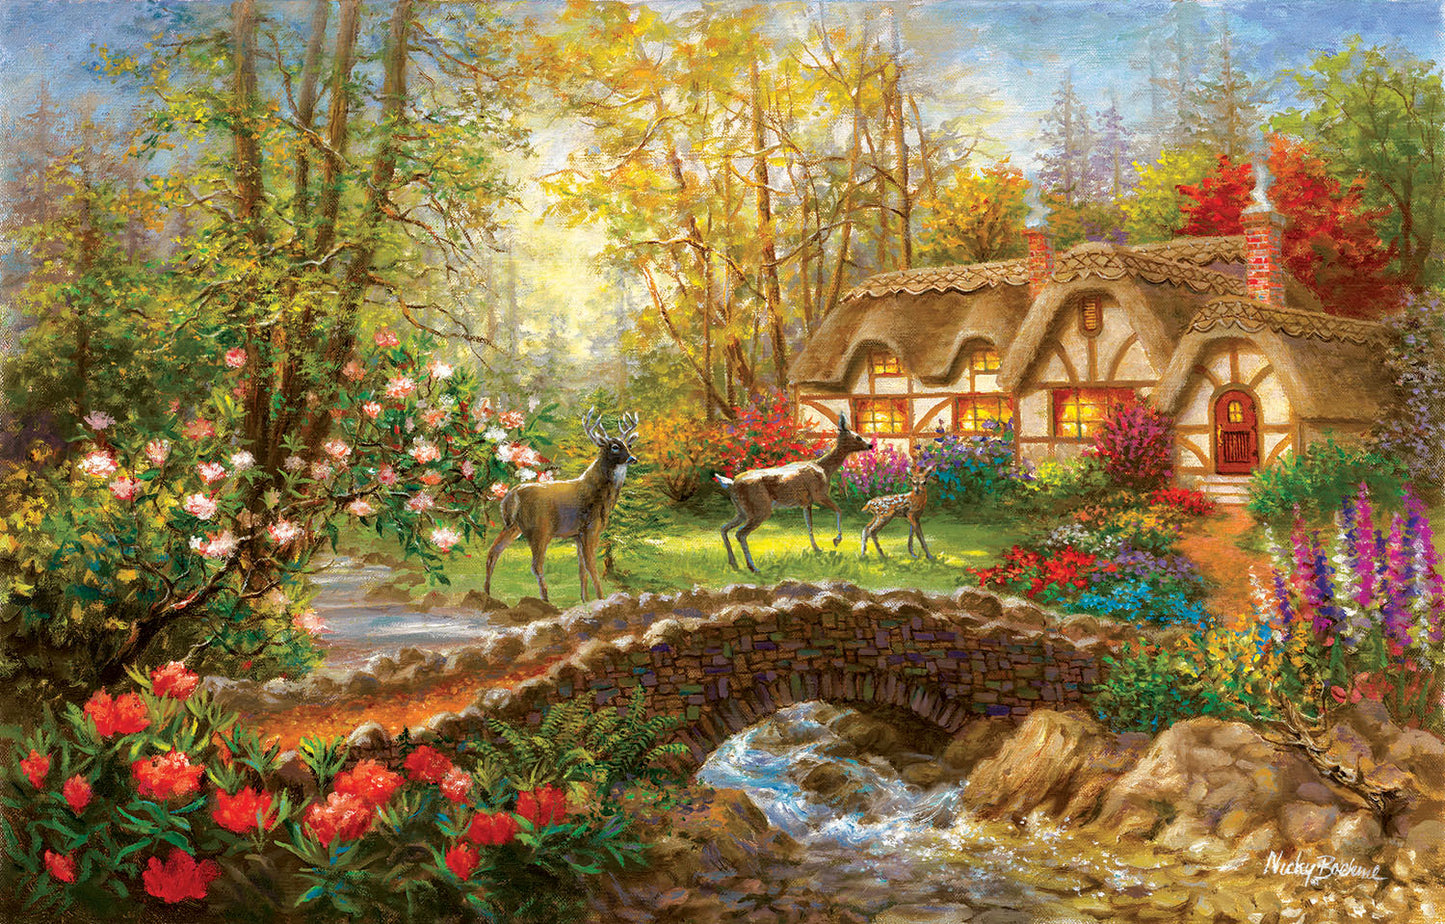 Visiting by Nicky Boehme, 1000 Piece Puzzle